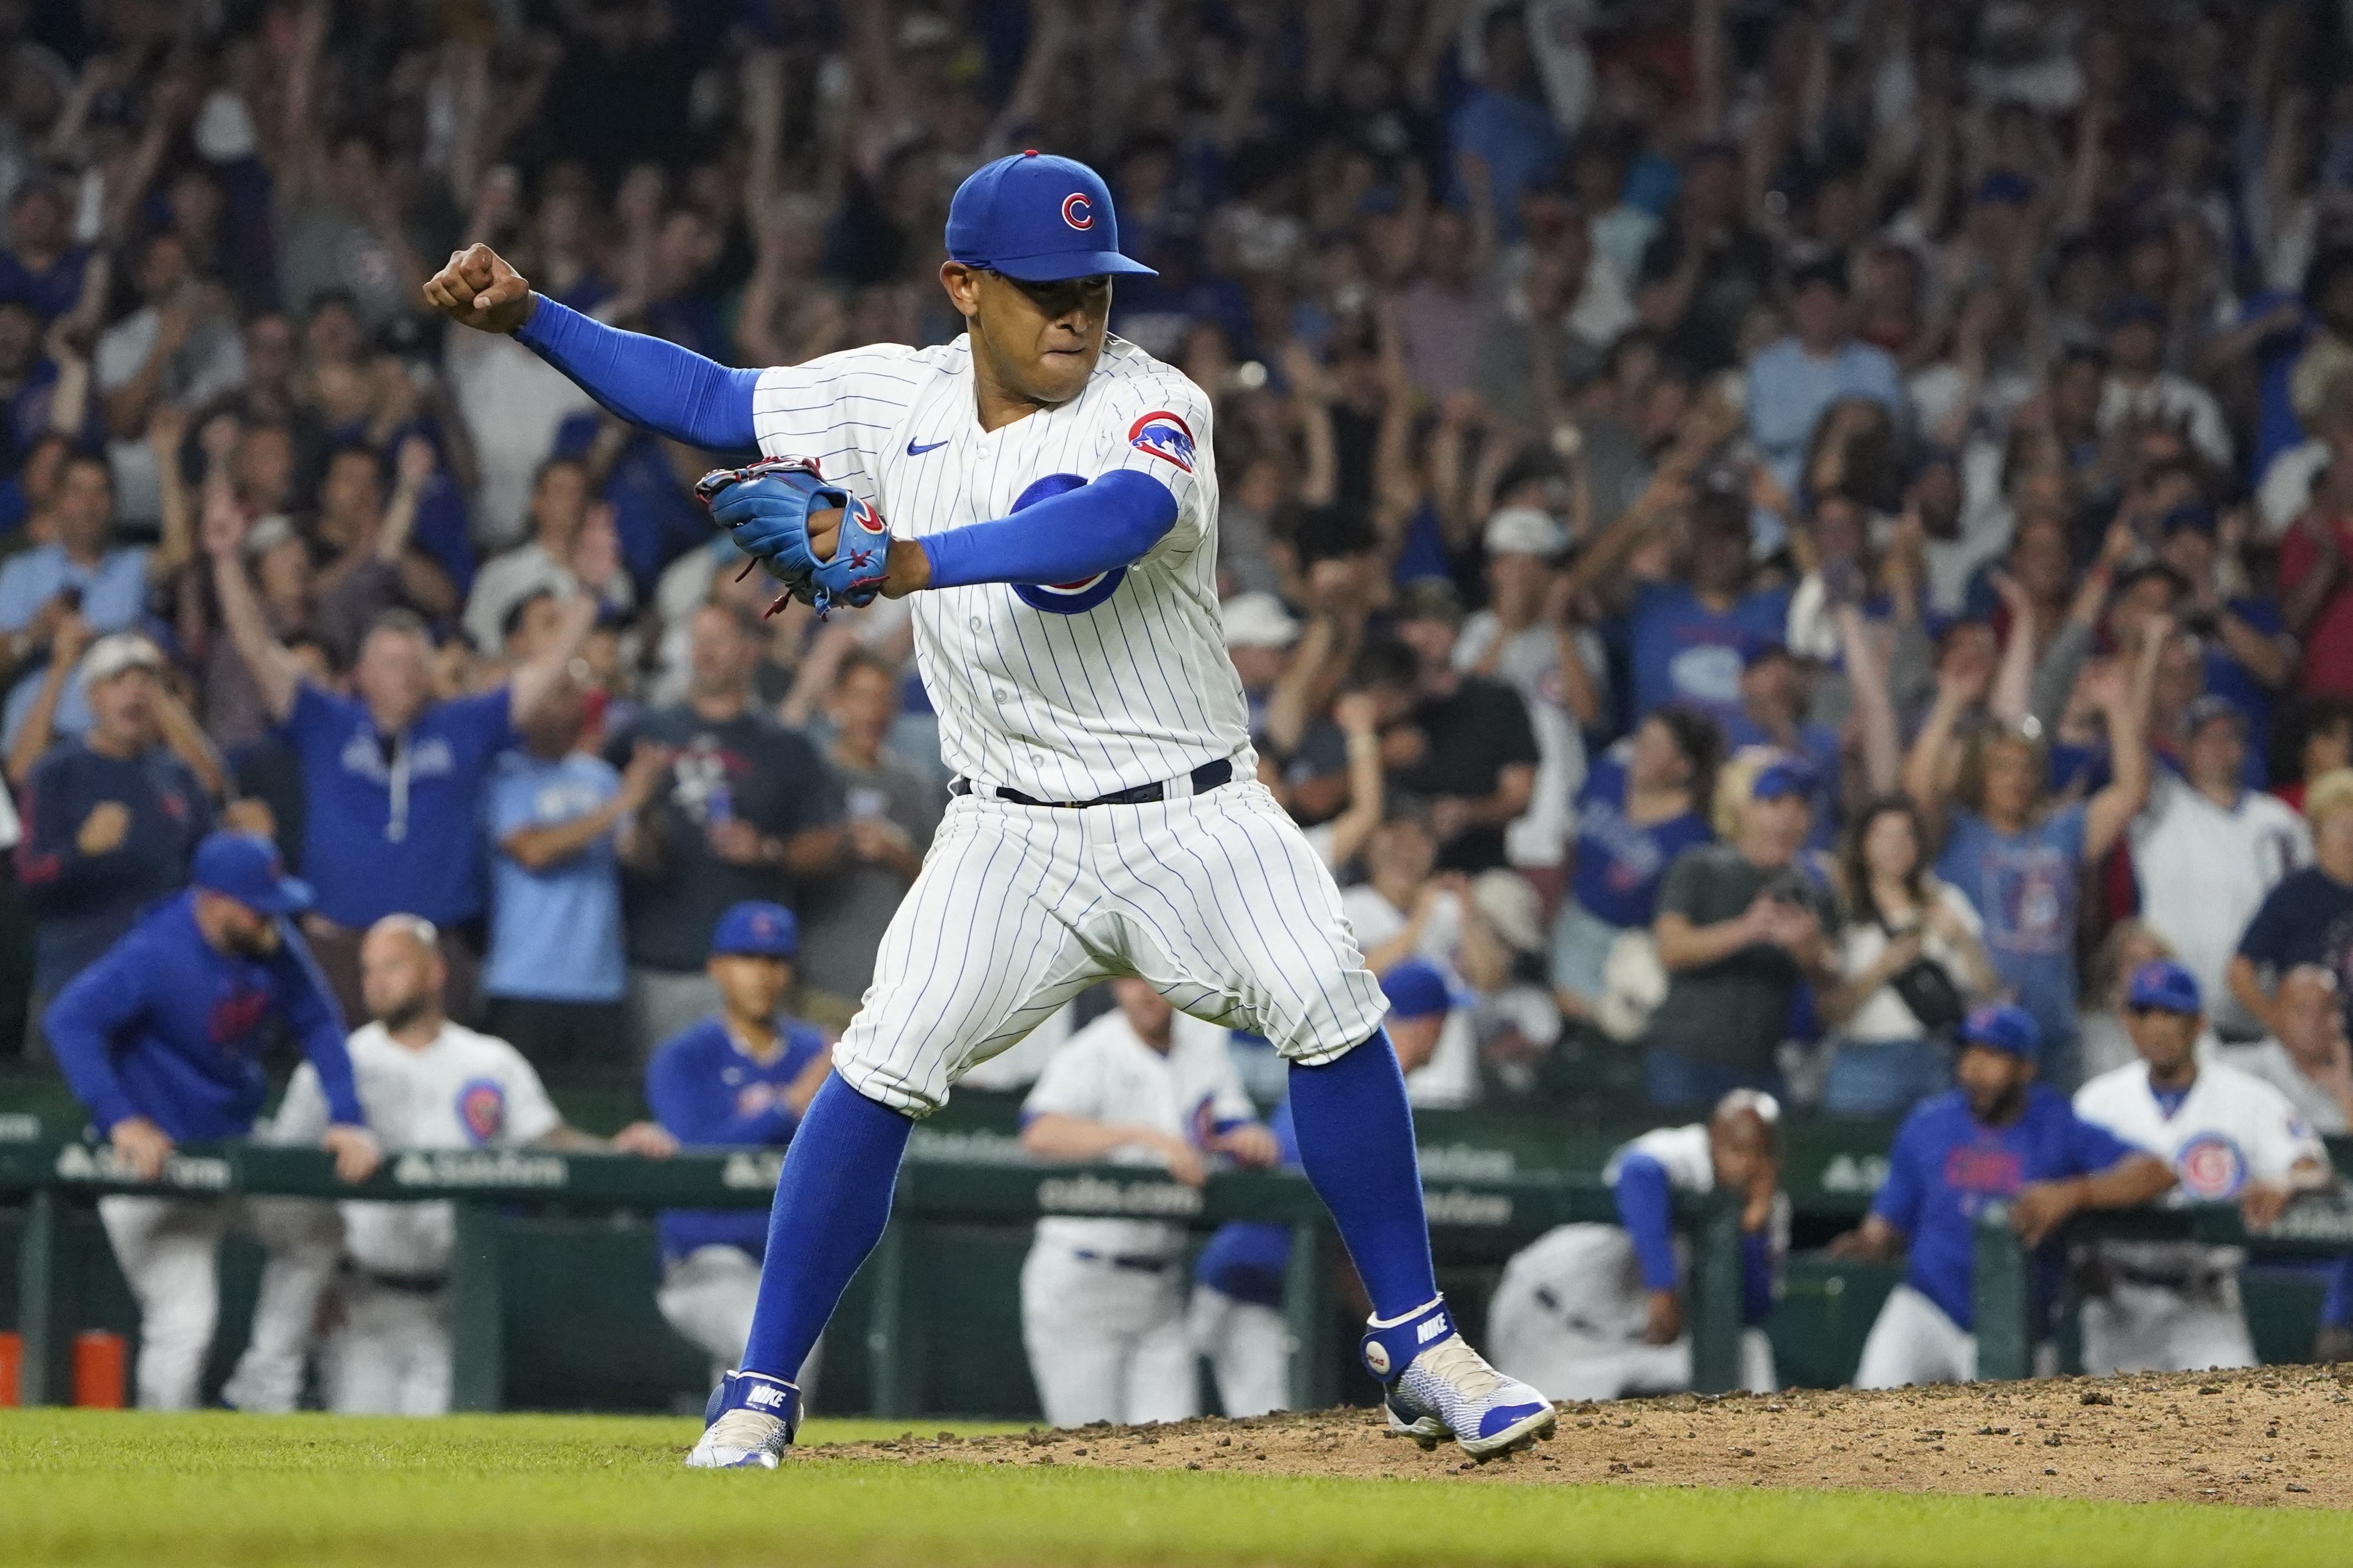 Cubs beat Reds for third straight win